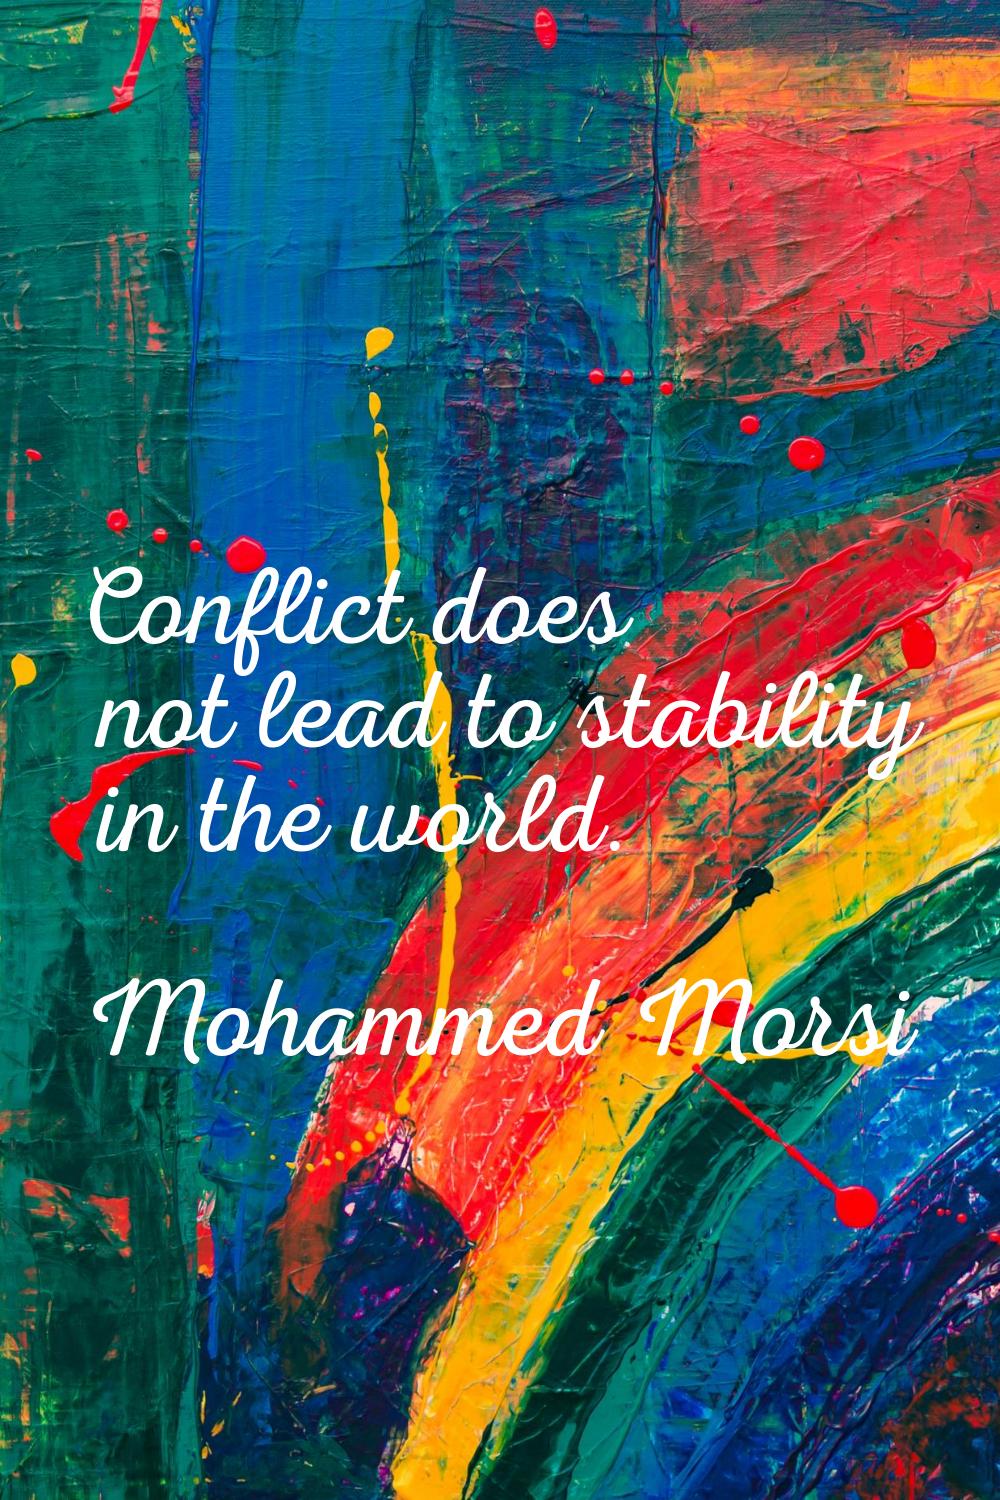 Conflict does not lead to stability in the world.